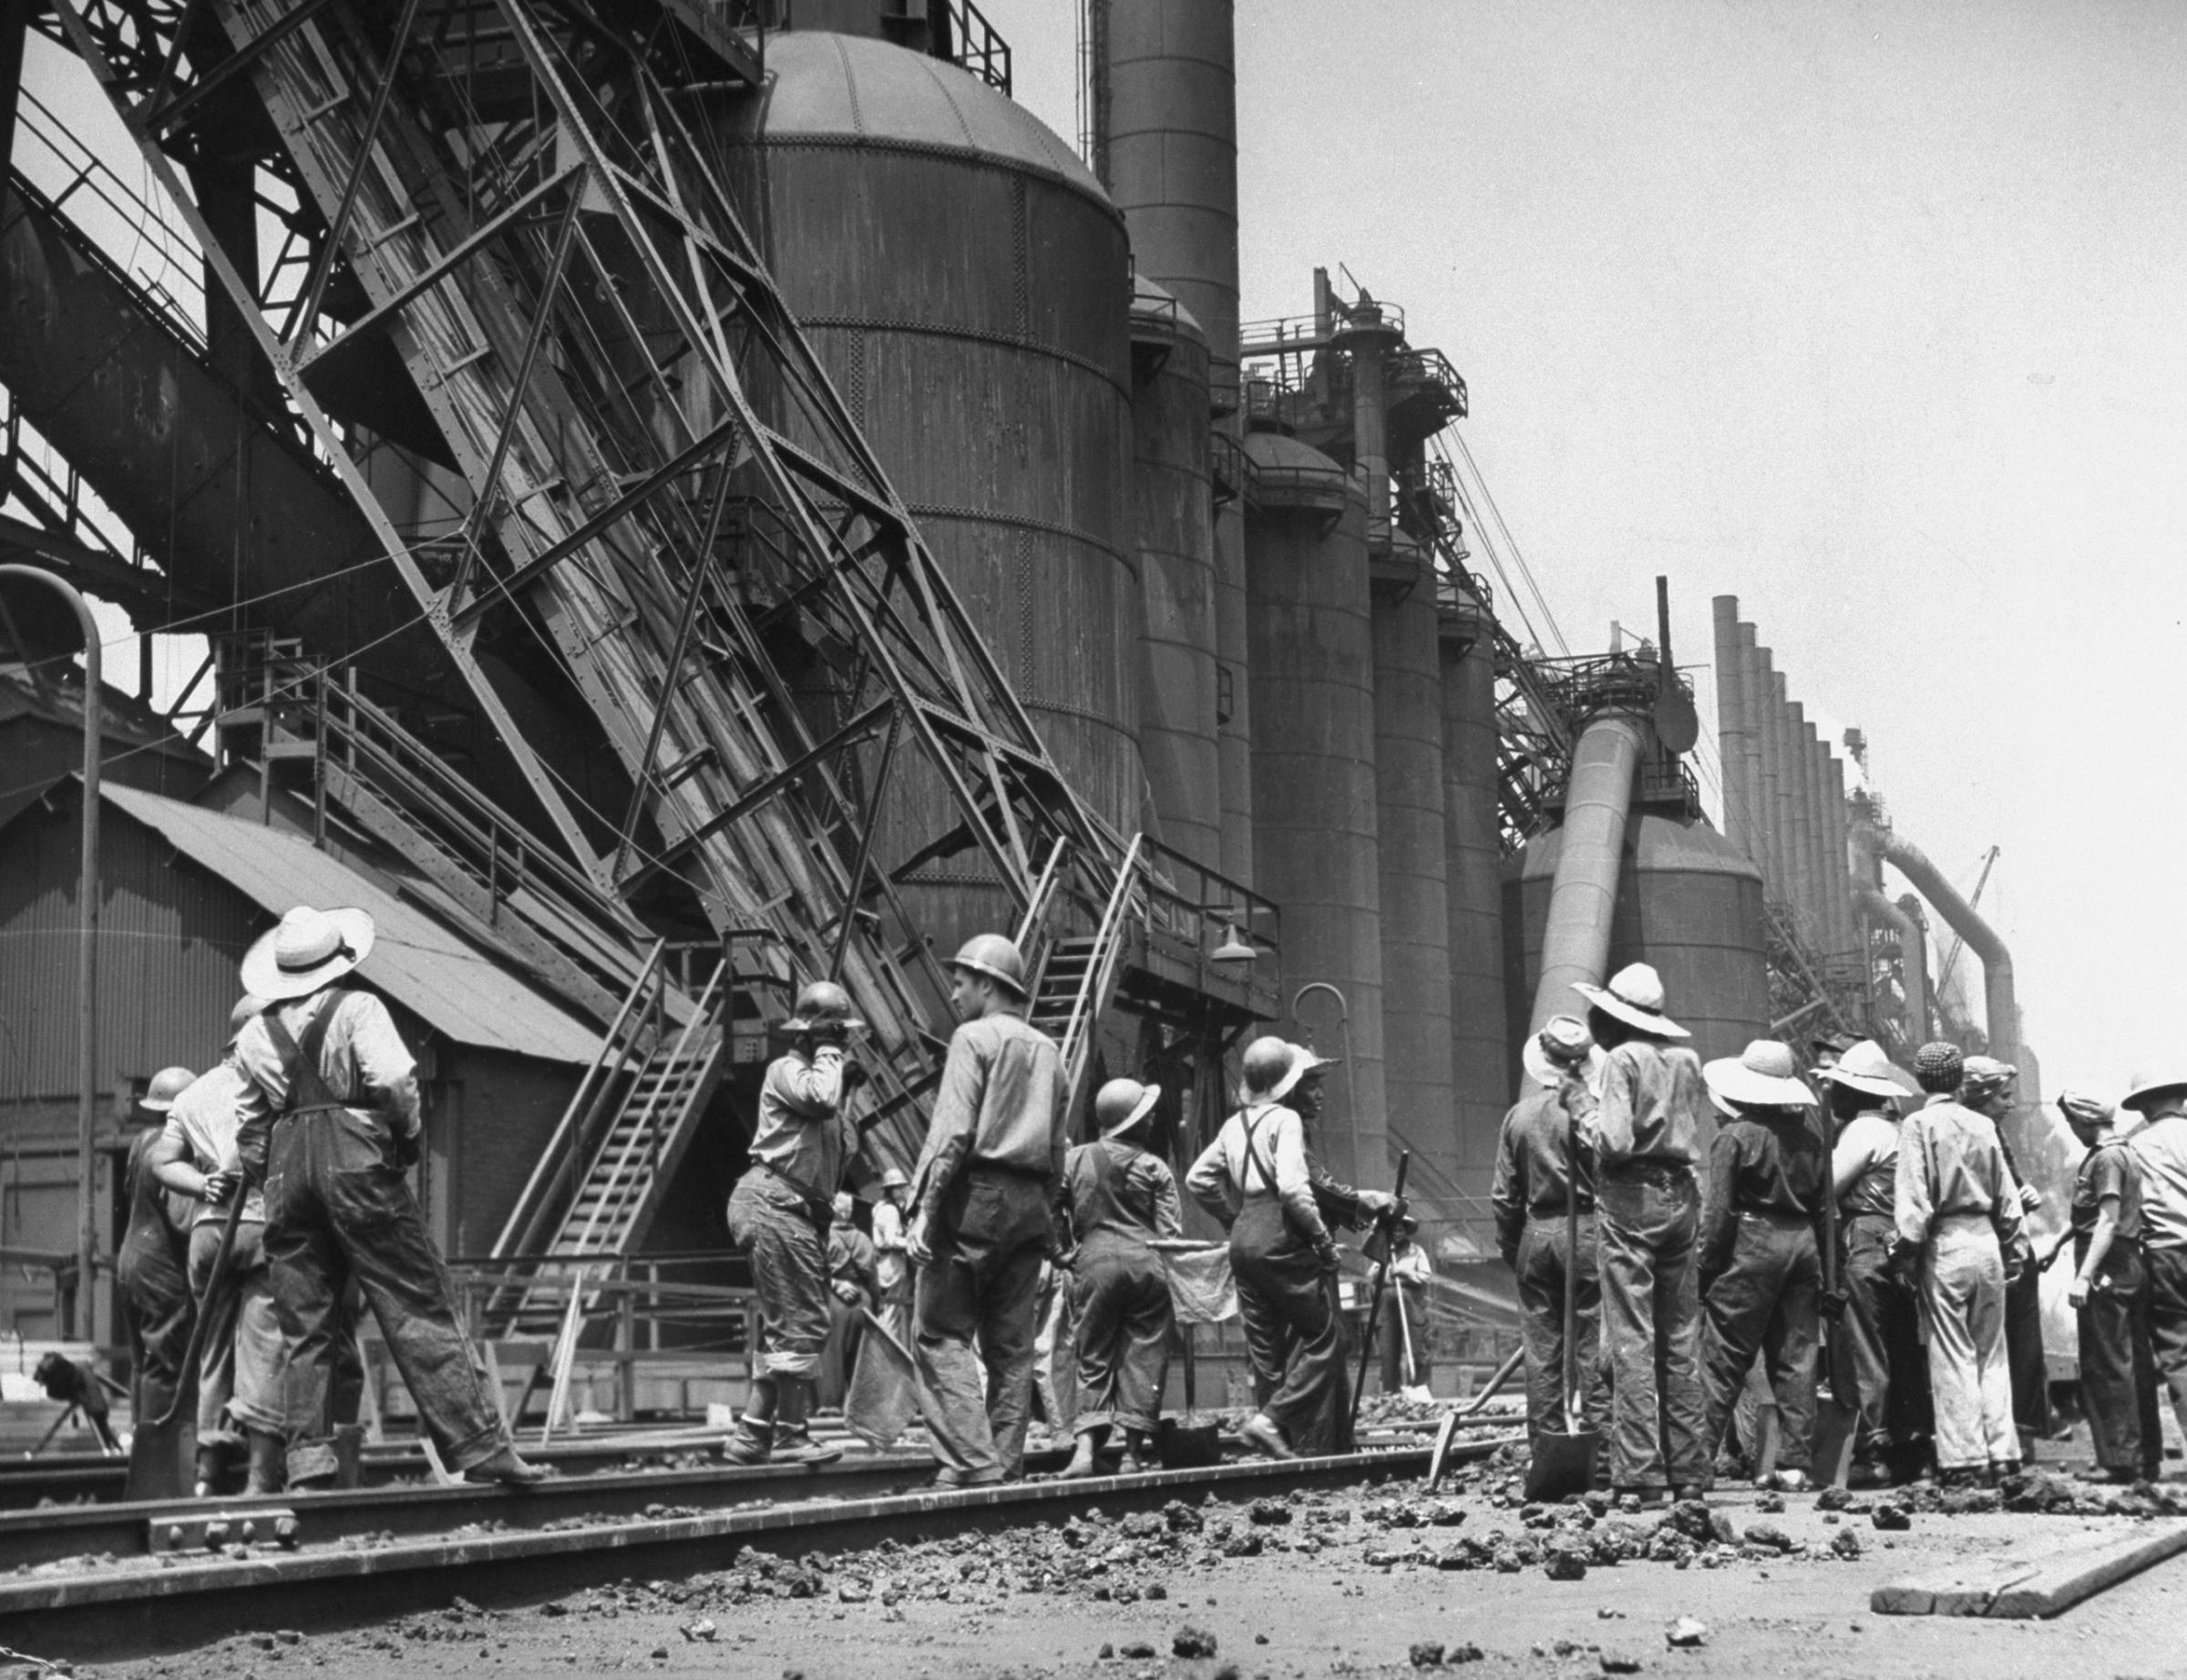 Women laborers clear tracks of spilled materials, Gary, Ind. 1943.